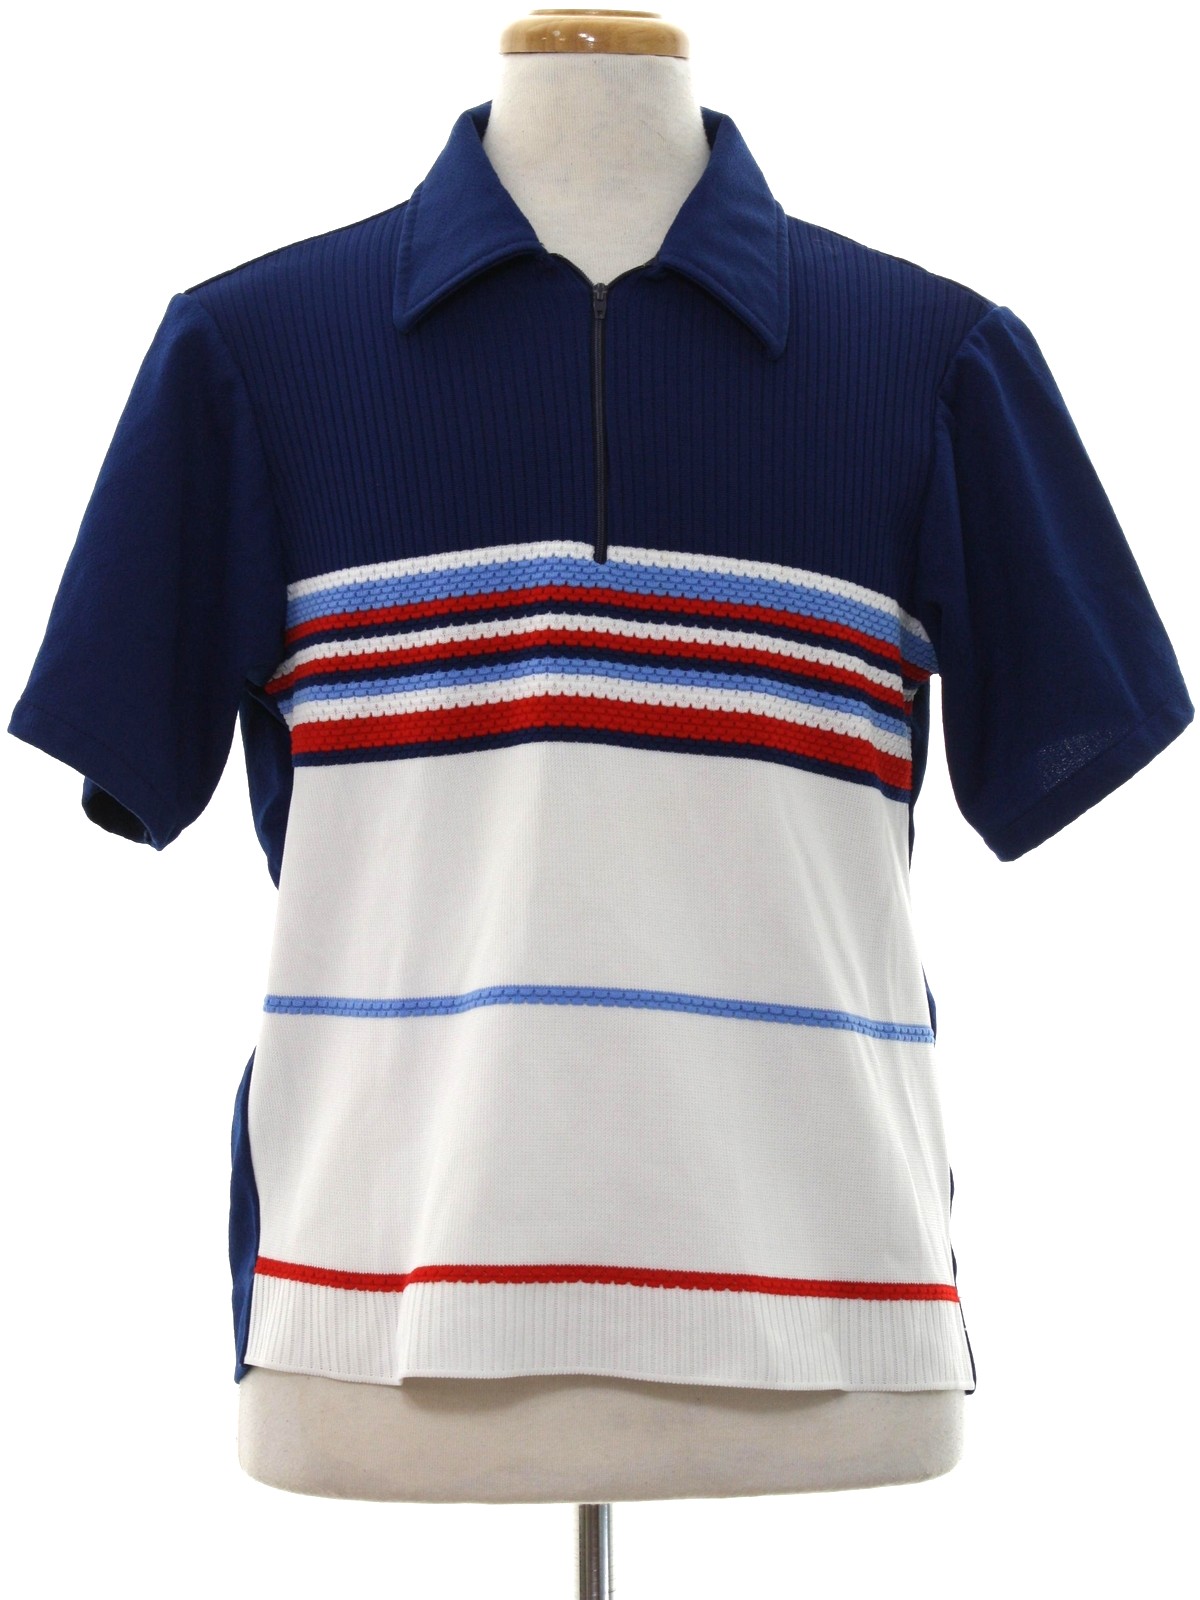 70s Retro Knit Shirt: 70s -Van Cort- Mens navy blue, white, red and sky ...